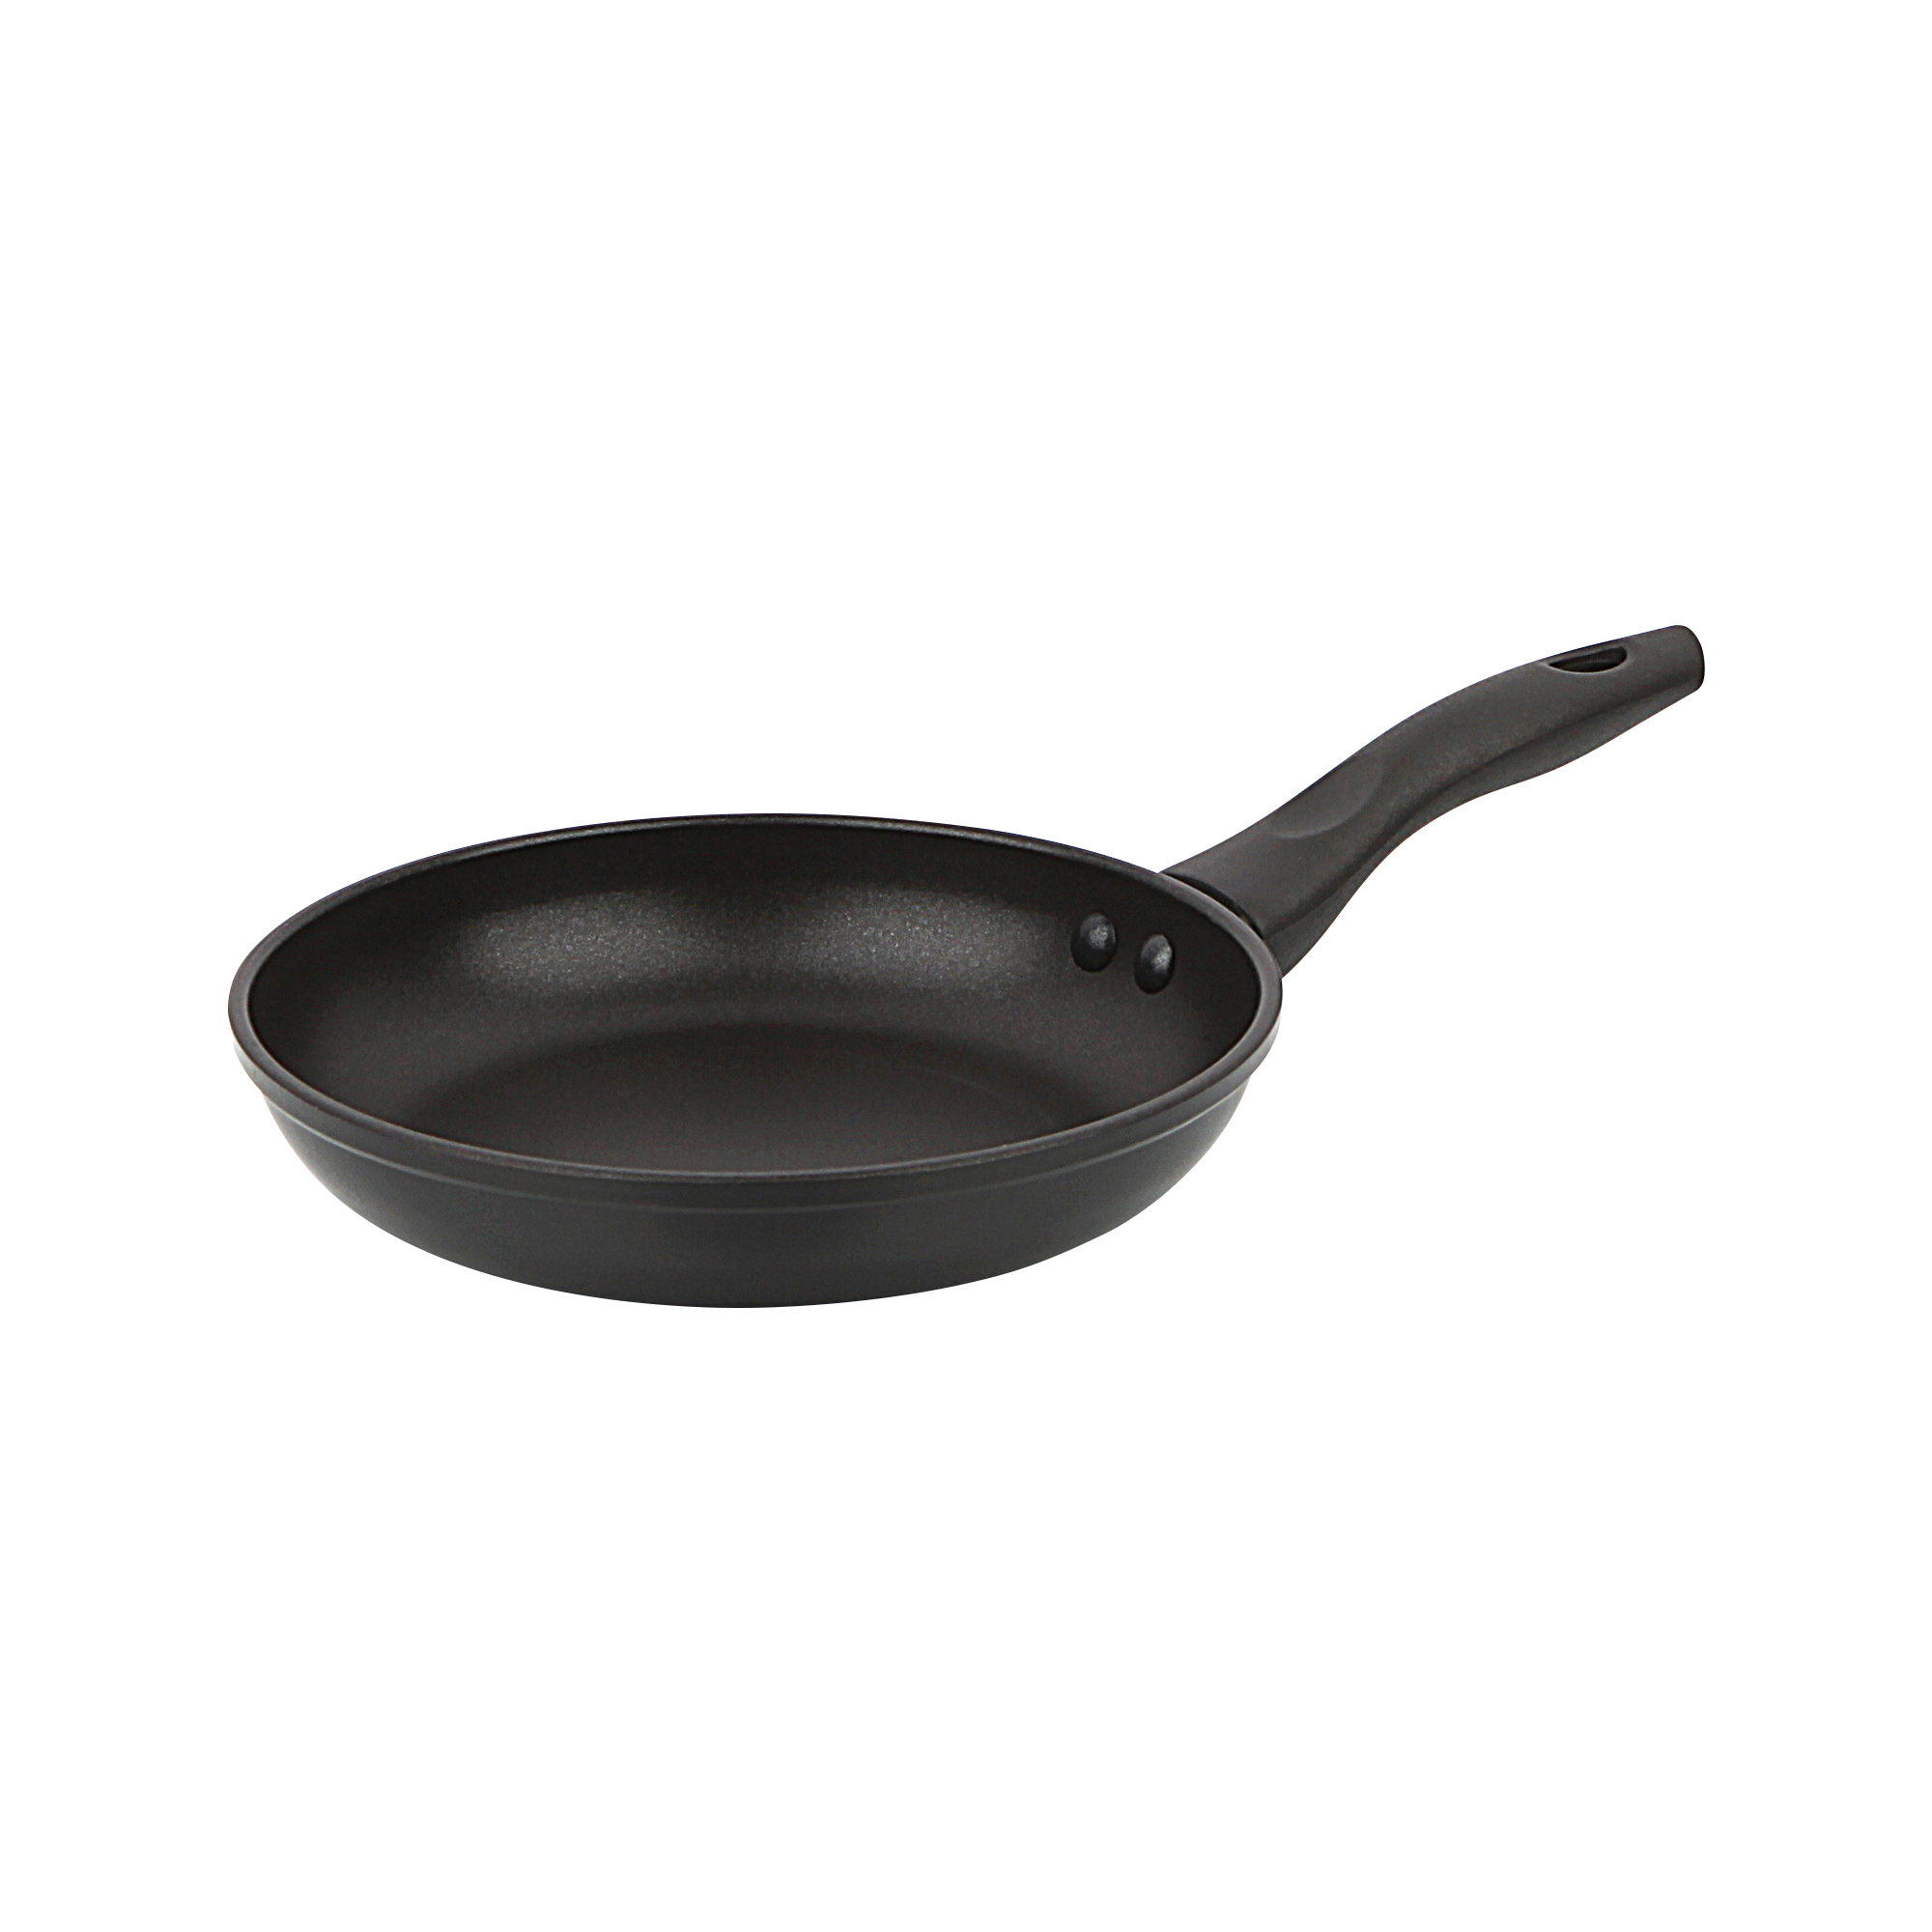 Mainstays Aluminum Alloy 8 inch Non-Stick Skillet 20cm Frypan - image 1 of 6